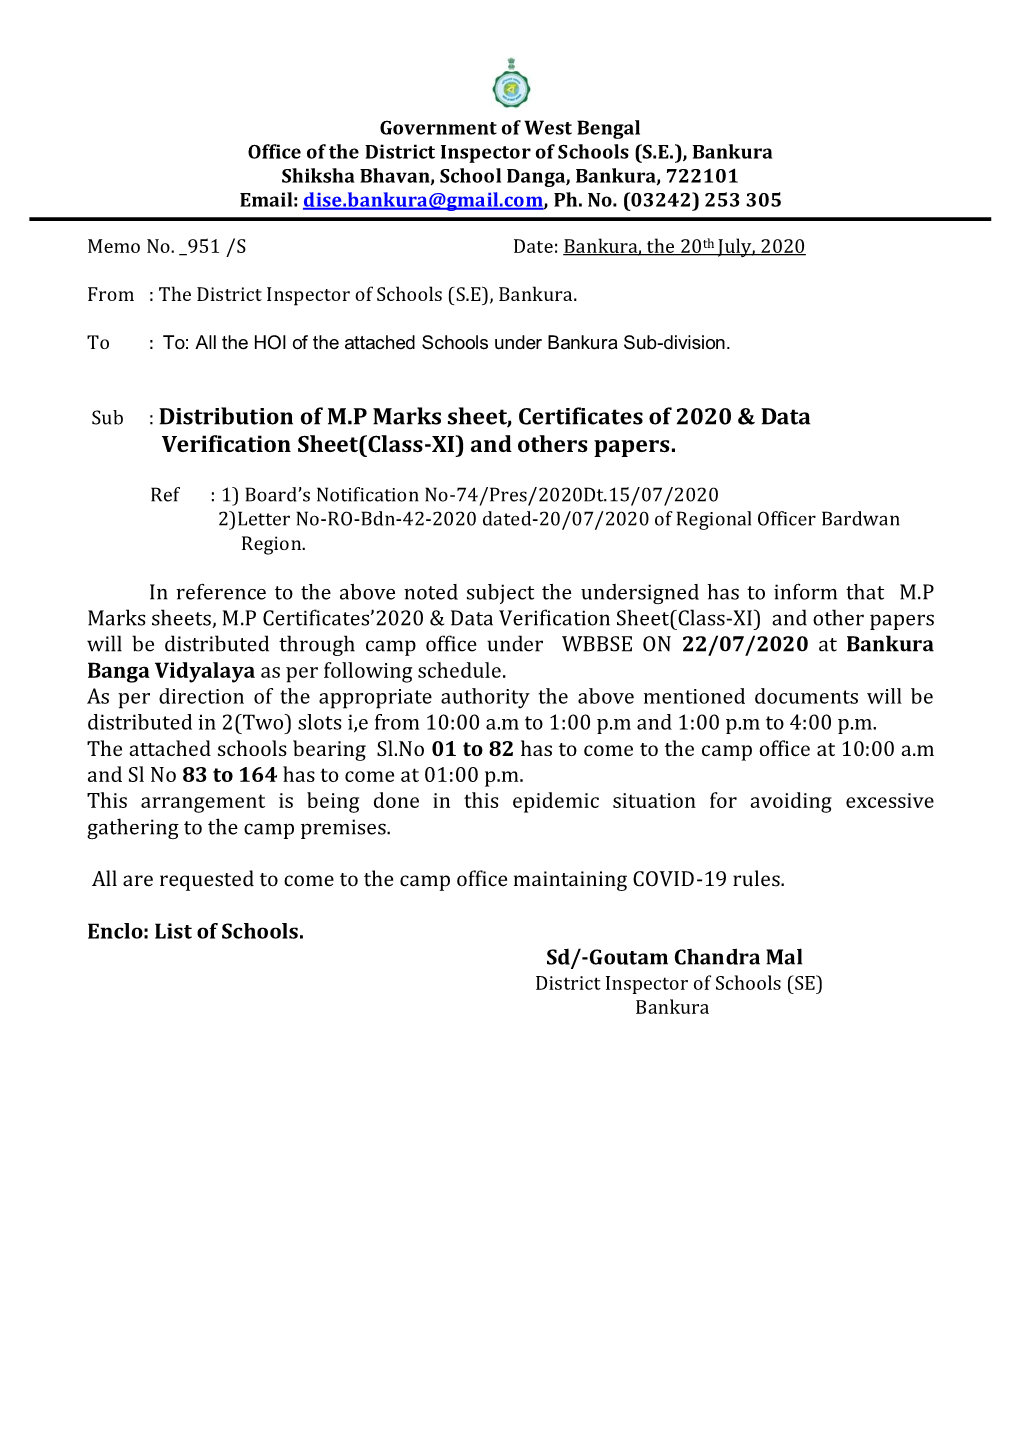 Sub : Distribution of M.P Marks Sheet, Certificates of 2020 & Data